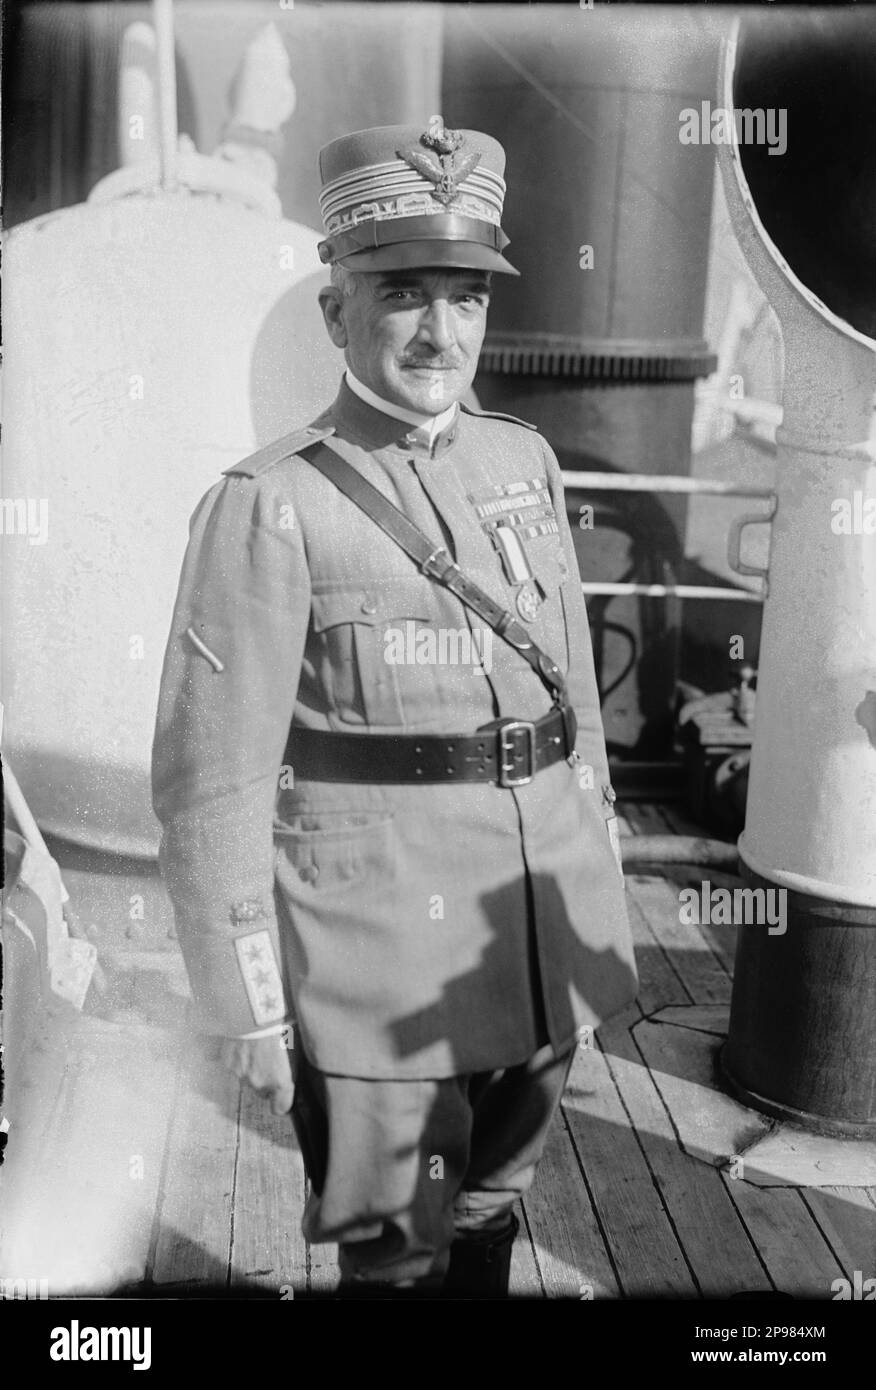 1921, 18 october , New York , USA  : The italian Generale and  Marshal of Italy  ARMANDO DIAZ  ( 1861 - 1928 ) arrive in USA . On November 1, 1921 Diaz was in Kansas City to take part in the groundbreaking ceremony for the Liberty Memorial that was being constructed there. Also present that day were Lieutenant General Baron Jacques of Belgium, Admiral David Beatty of Great Britain, Marshal Ferdinand Foch of France and General John J. Pershing of the United States. One of the main speakers was Vice President Calvin Coolidge of the United States. In 1935 bas-reliefs of Jacques, Foch, Diaz and Pe Stock Photo